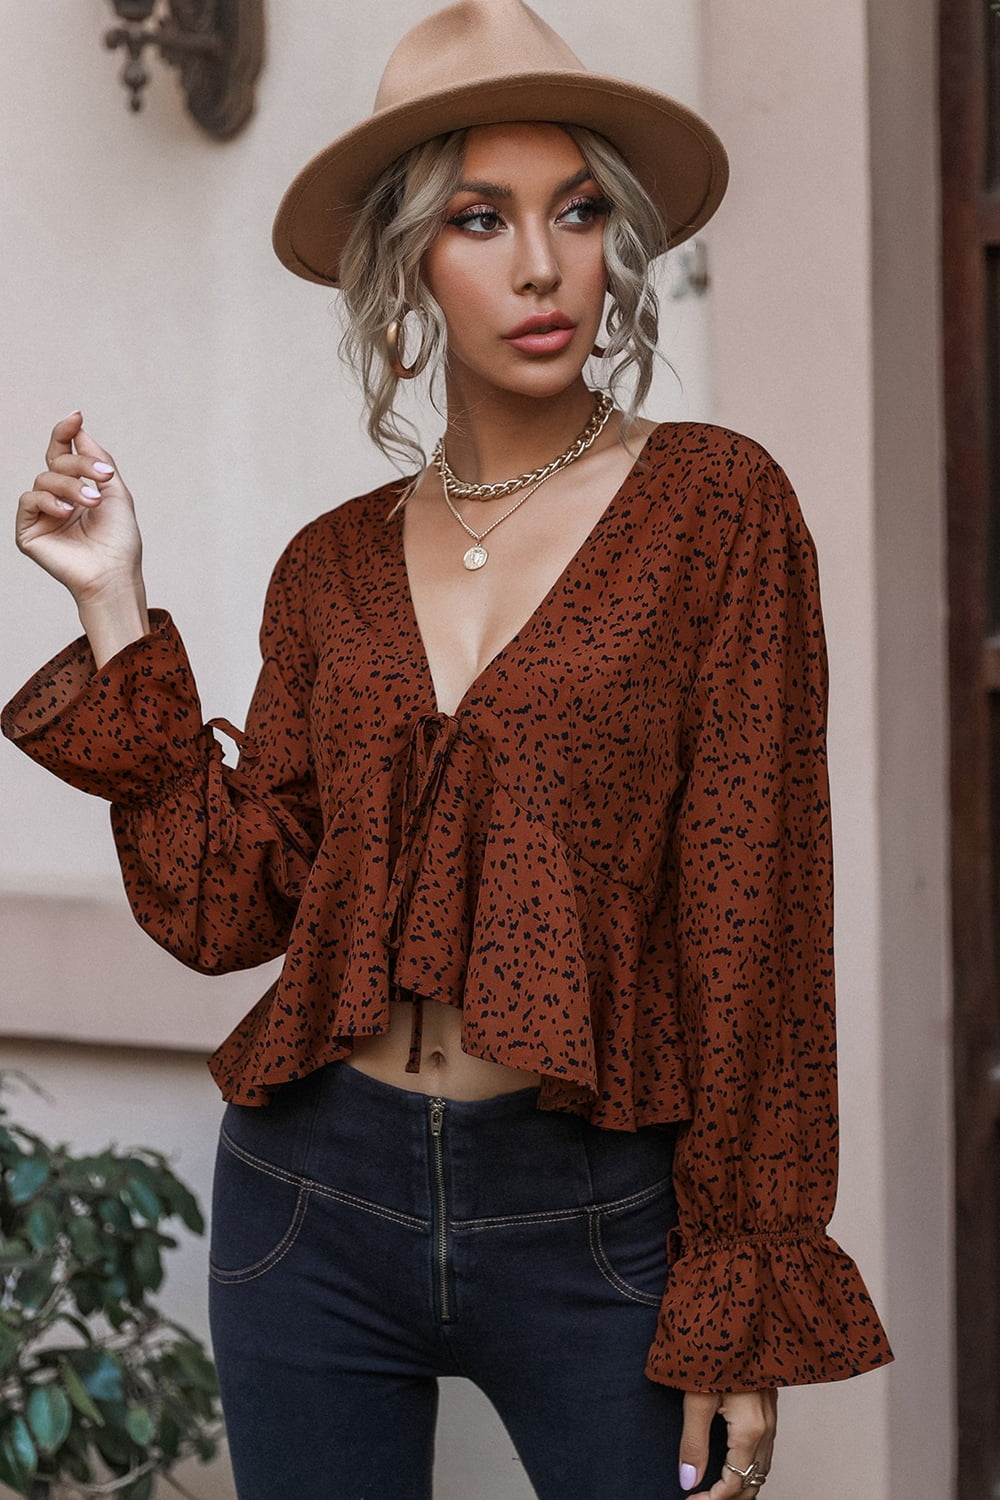 Cropped V-Neck Long Sleeve Blouse - Women’s Clothing & Accessories - Shirts & Tops - 7 - 2024